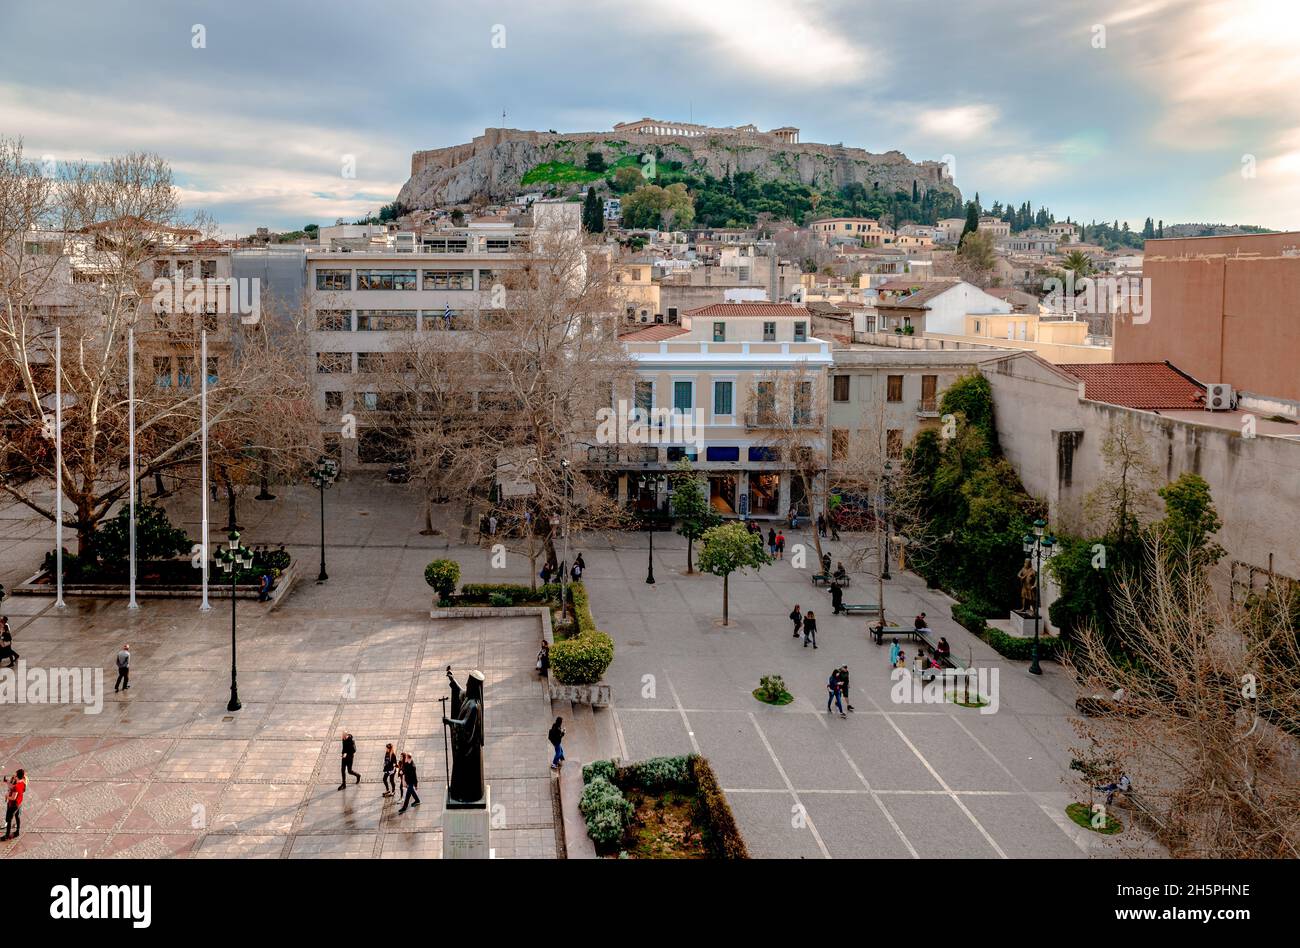 View of the Mitropoleos Square from above, with the historic neighbourhood of Plaka and the Acropolis of Athens in the background. Stock Photo